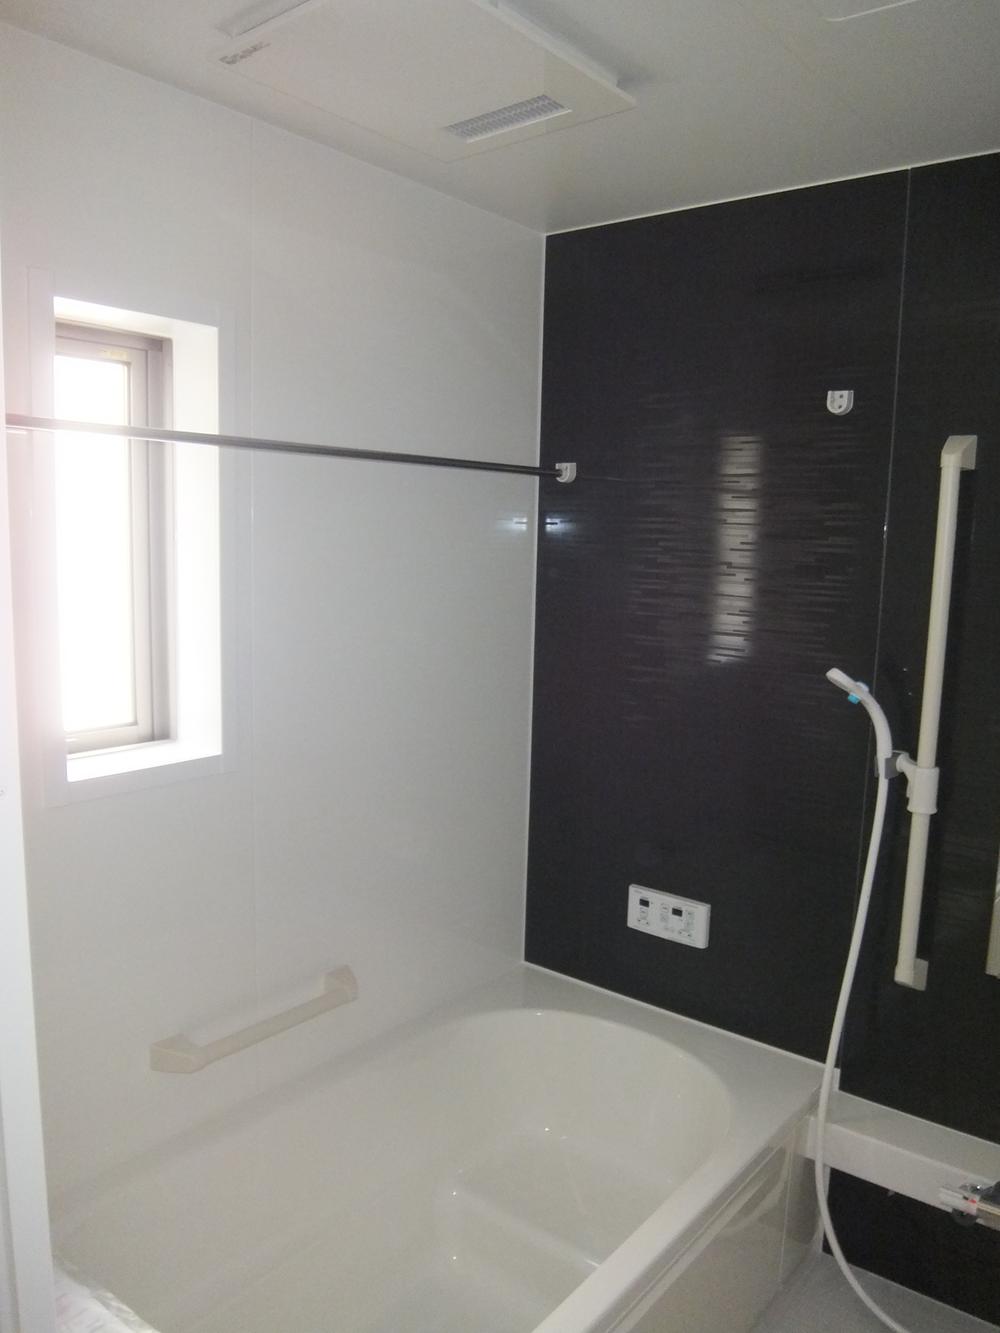 Same specifications photo (bathroom). Example of construction (bus with bathroom dryer)